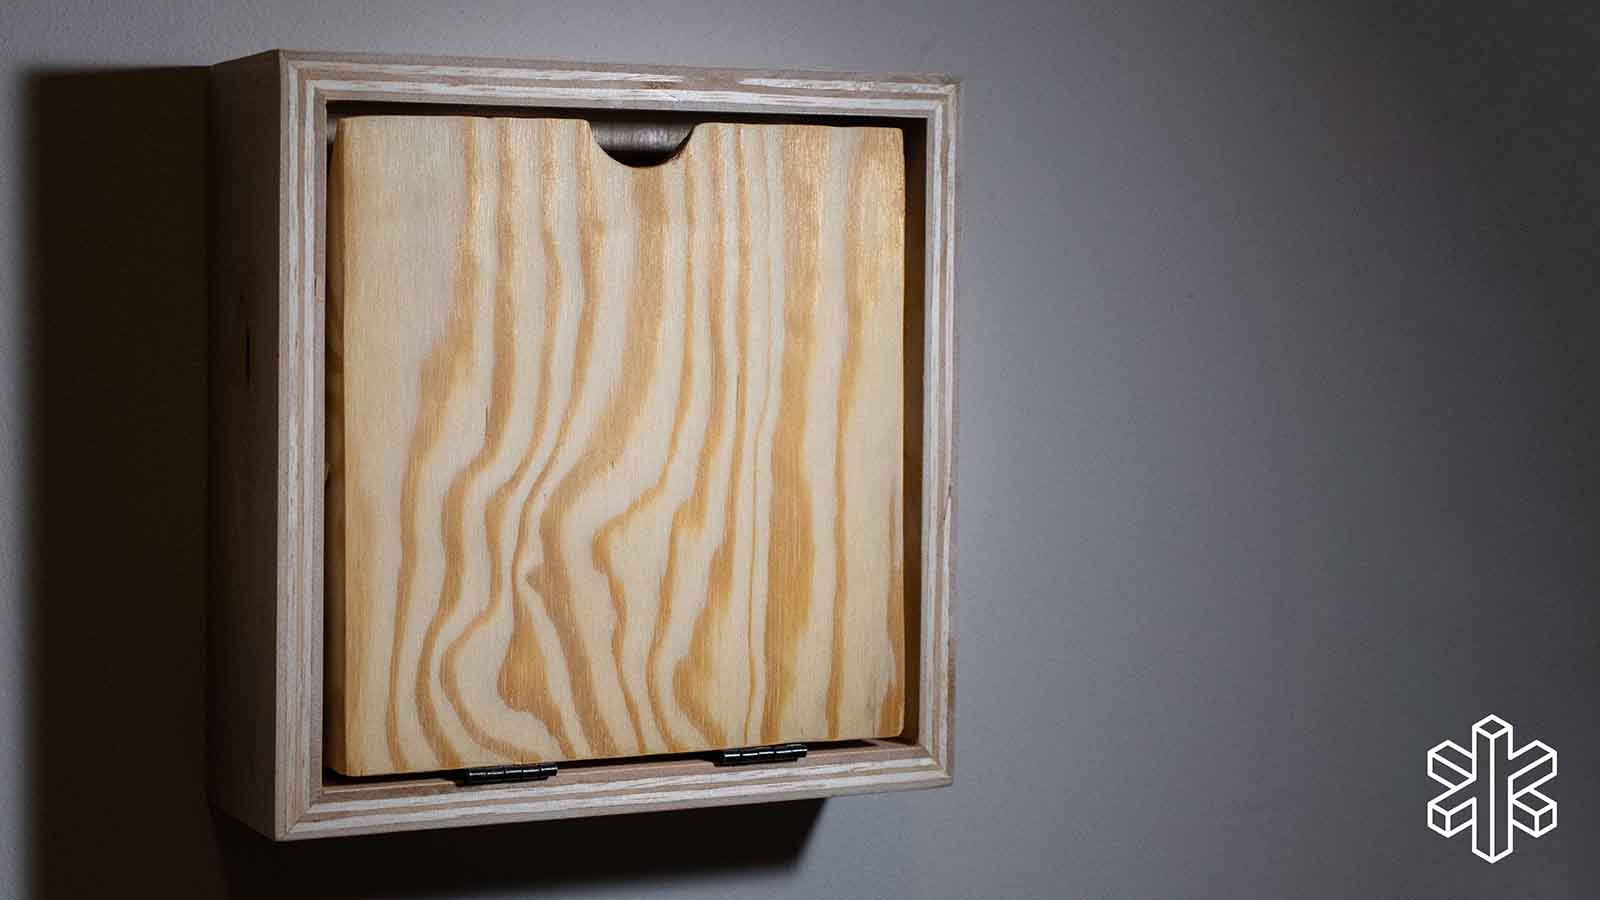 wooden box affixed to wall